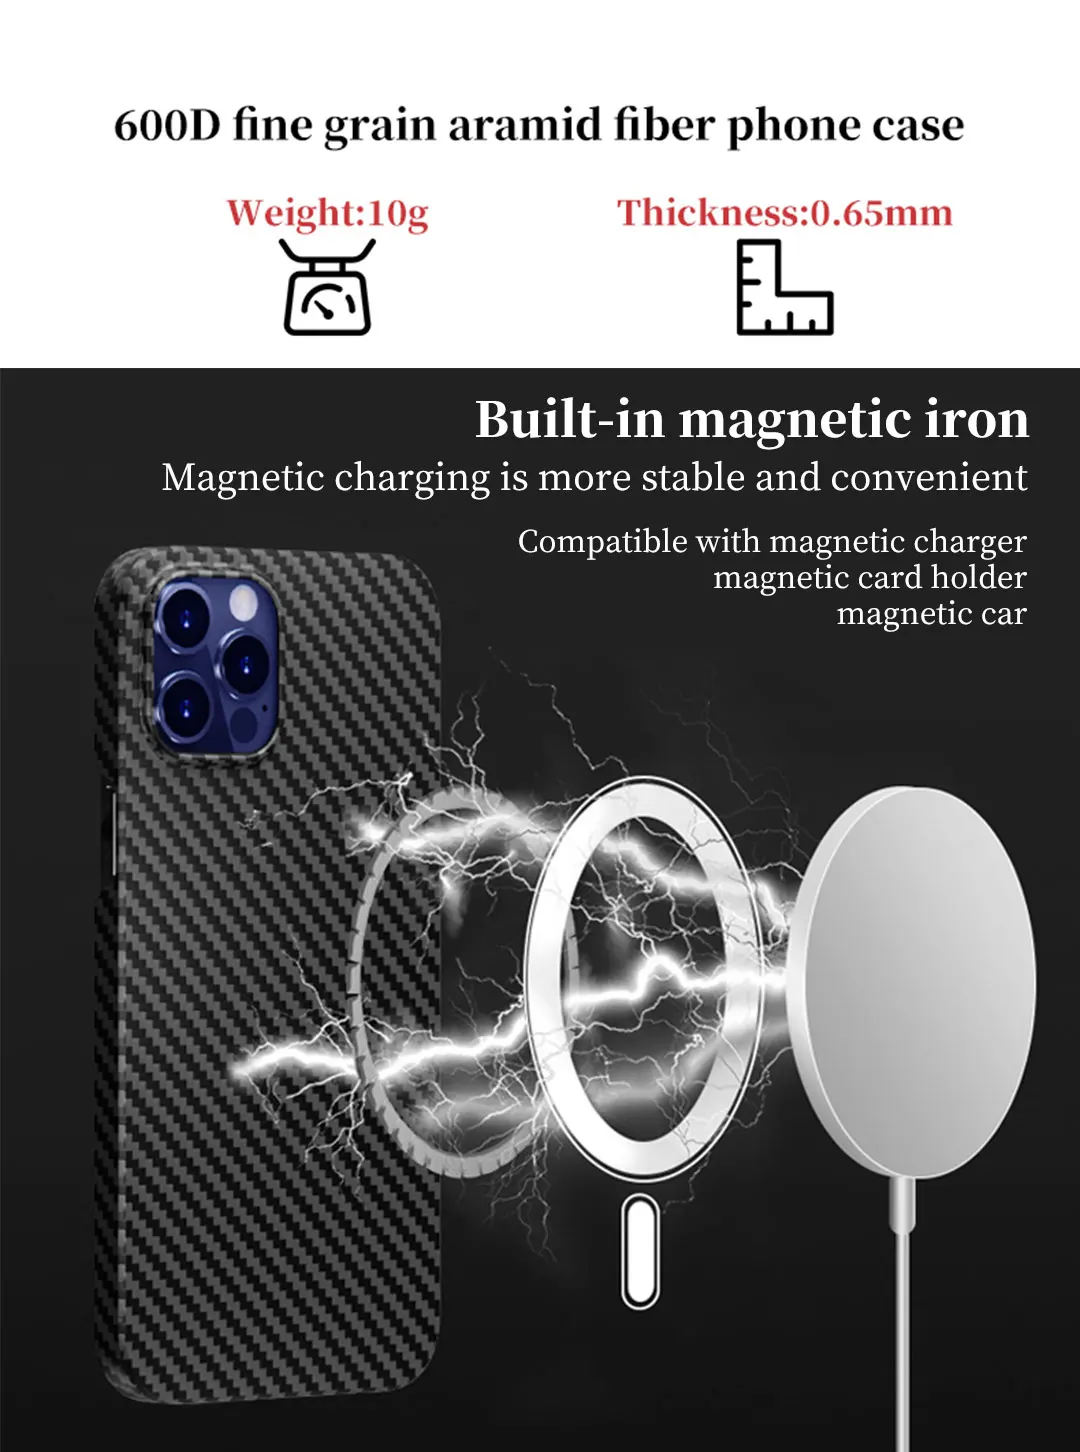 ACC-Real carbon case carbon Fiber Transparent Magnetic Magnet Case for iPhone 12 11 Pro Max Magsafe magnetic attraction function apple mag safe charger